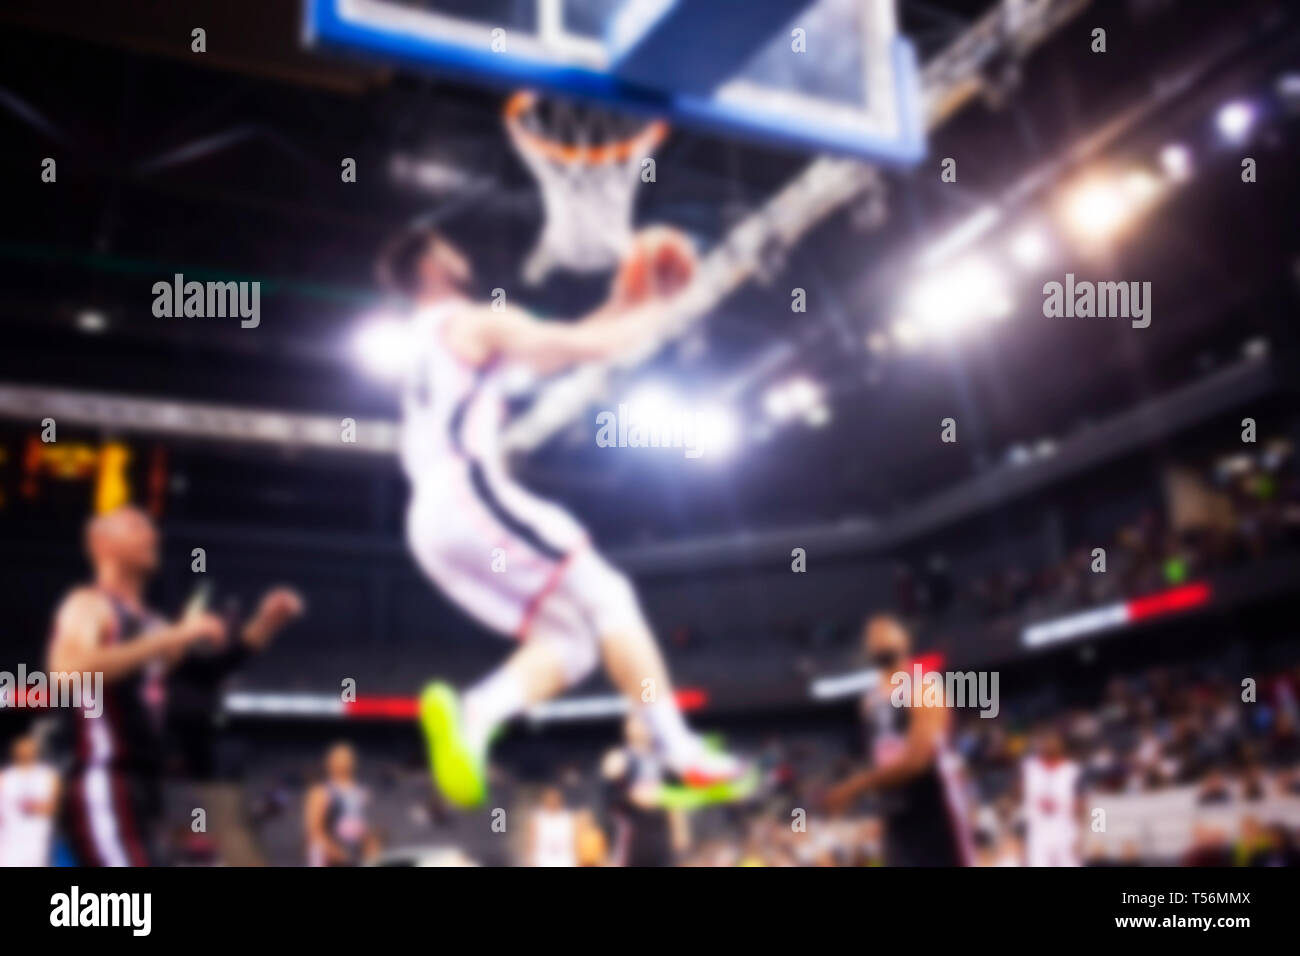 blurred image of basketball player during slam dunk - game background Stock Photo